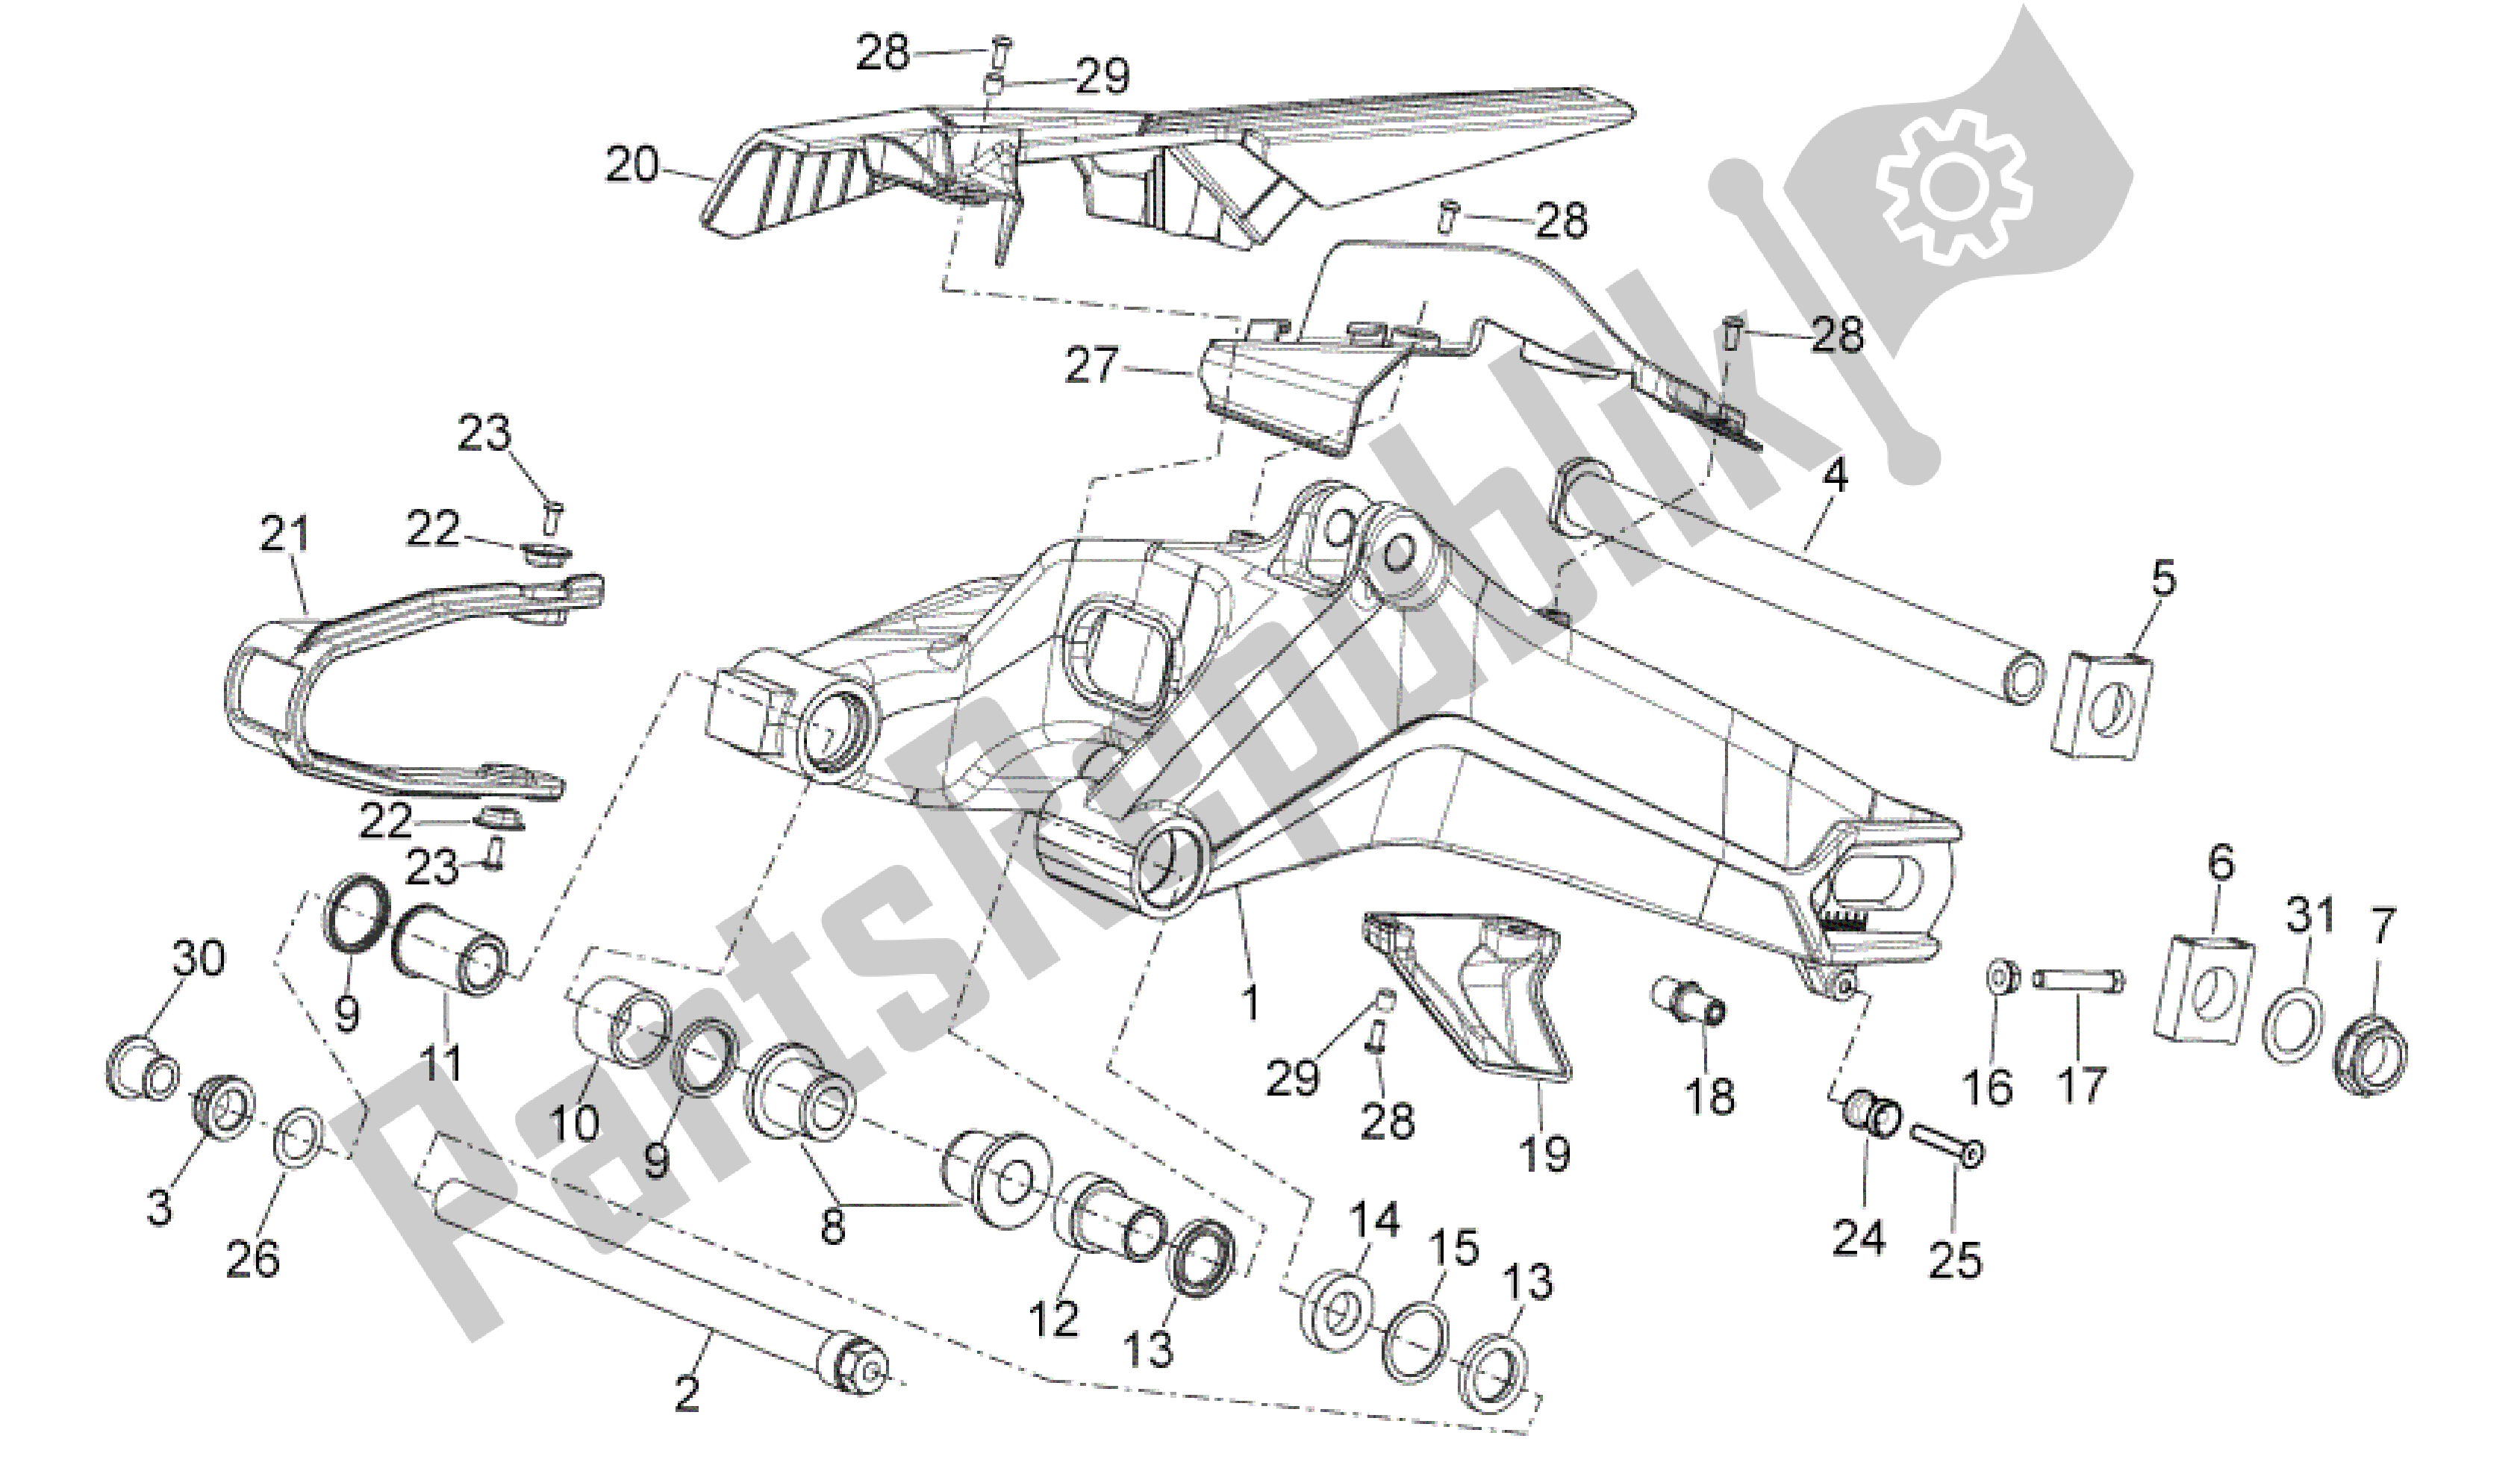 All parts for the Swing Arm of the Aprilia Mana 850 2009 - 2011